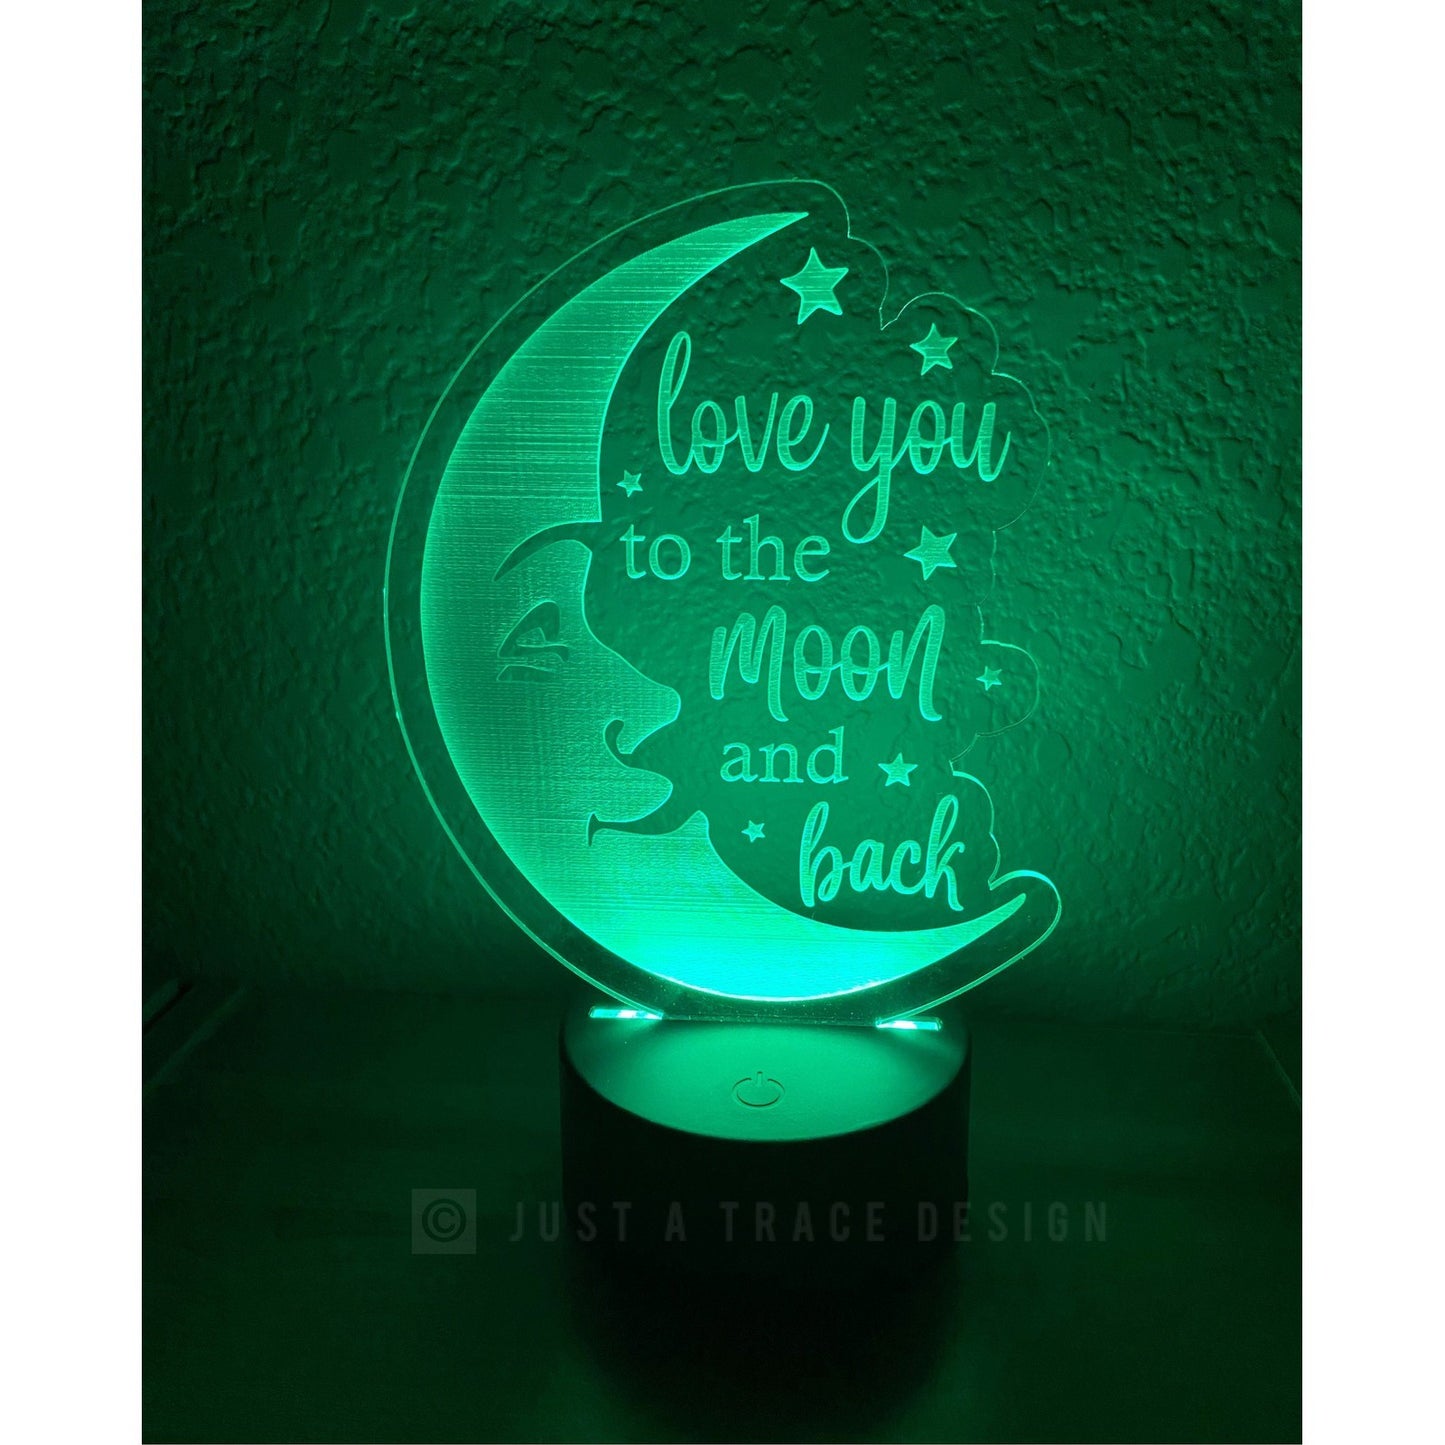 Love You To The Moon And Back Night Light, Acrylic Night Light, Kids Night Light, Love Nightlight, Moon Nightlight